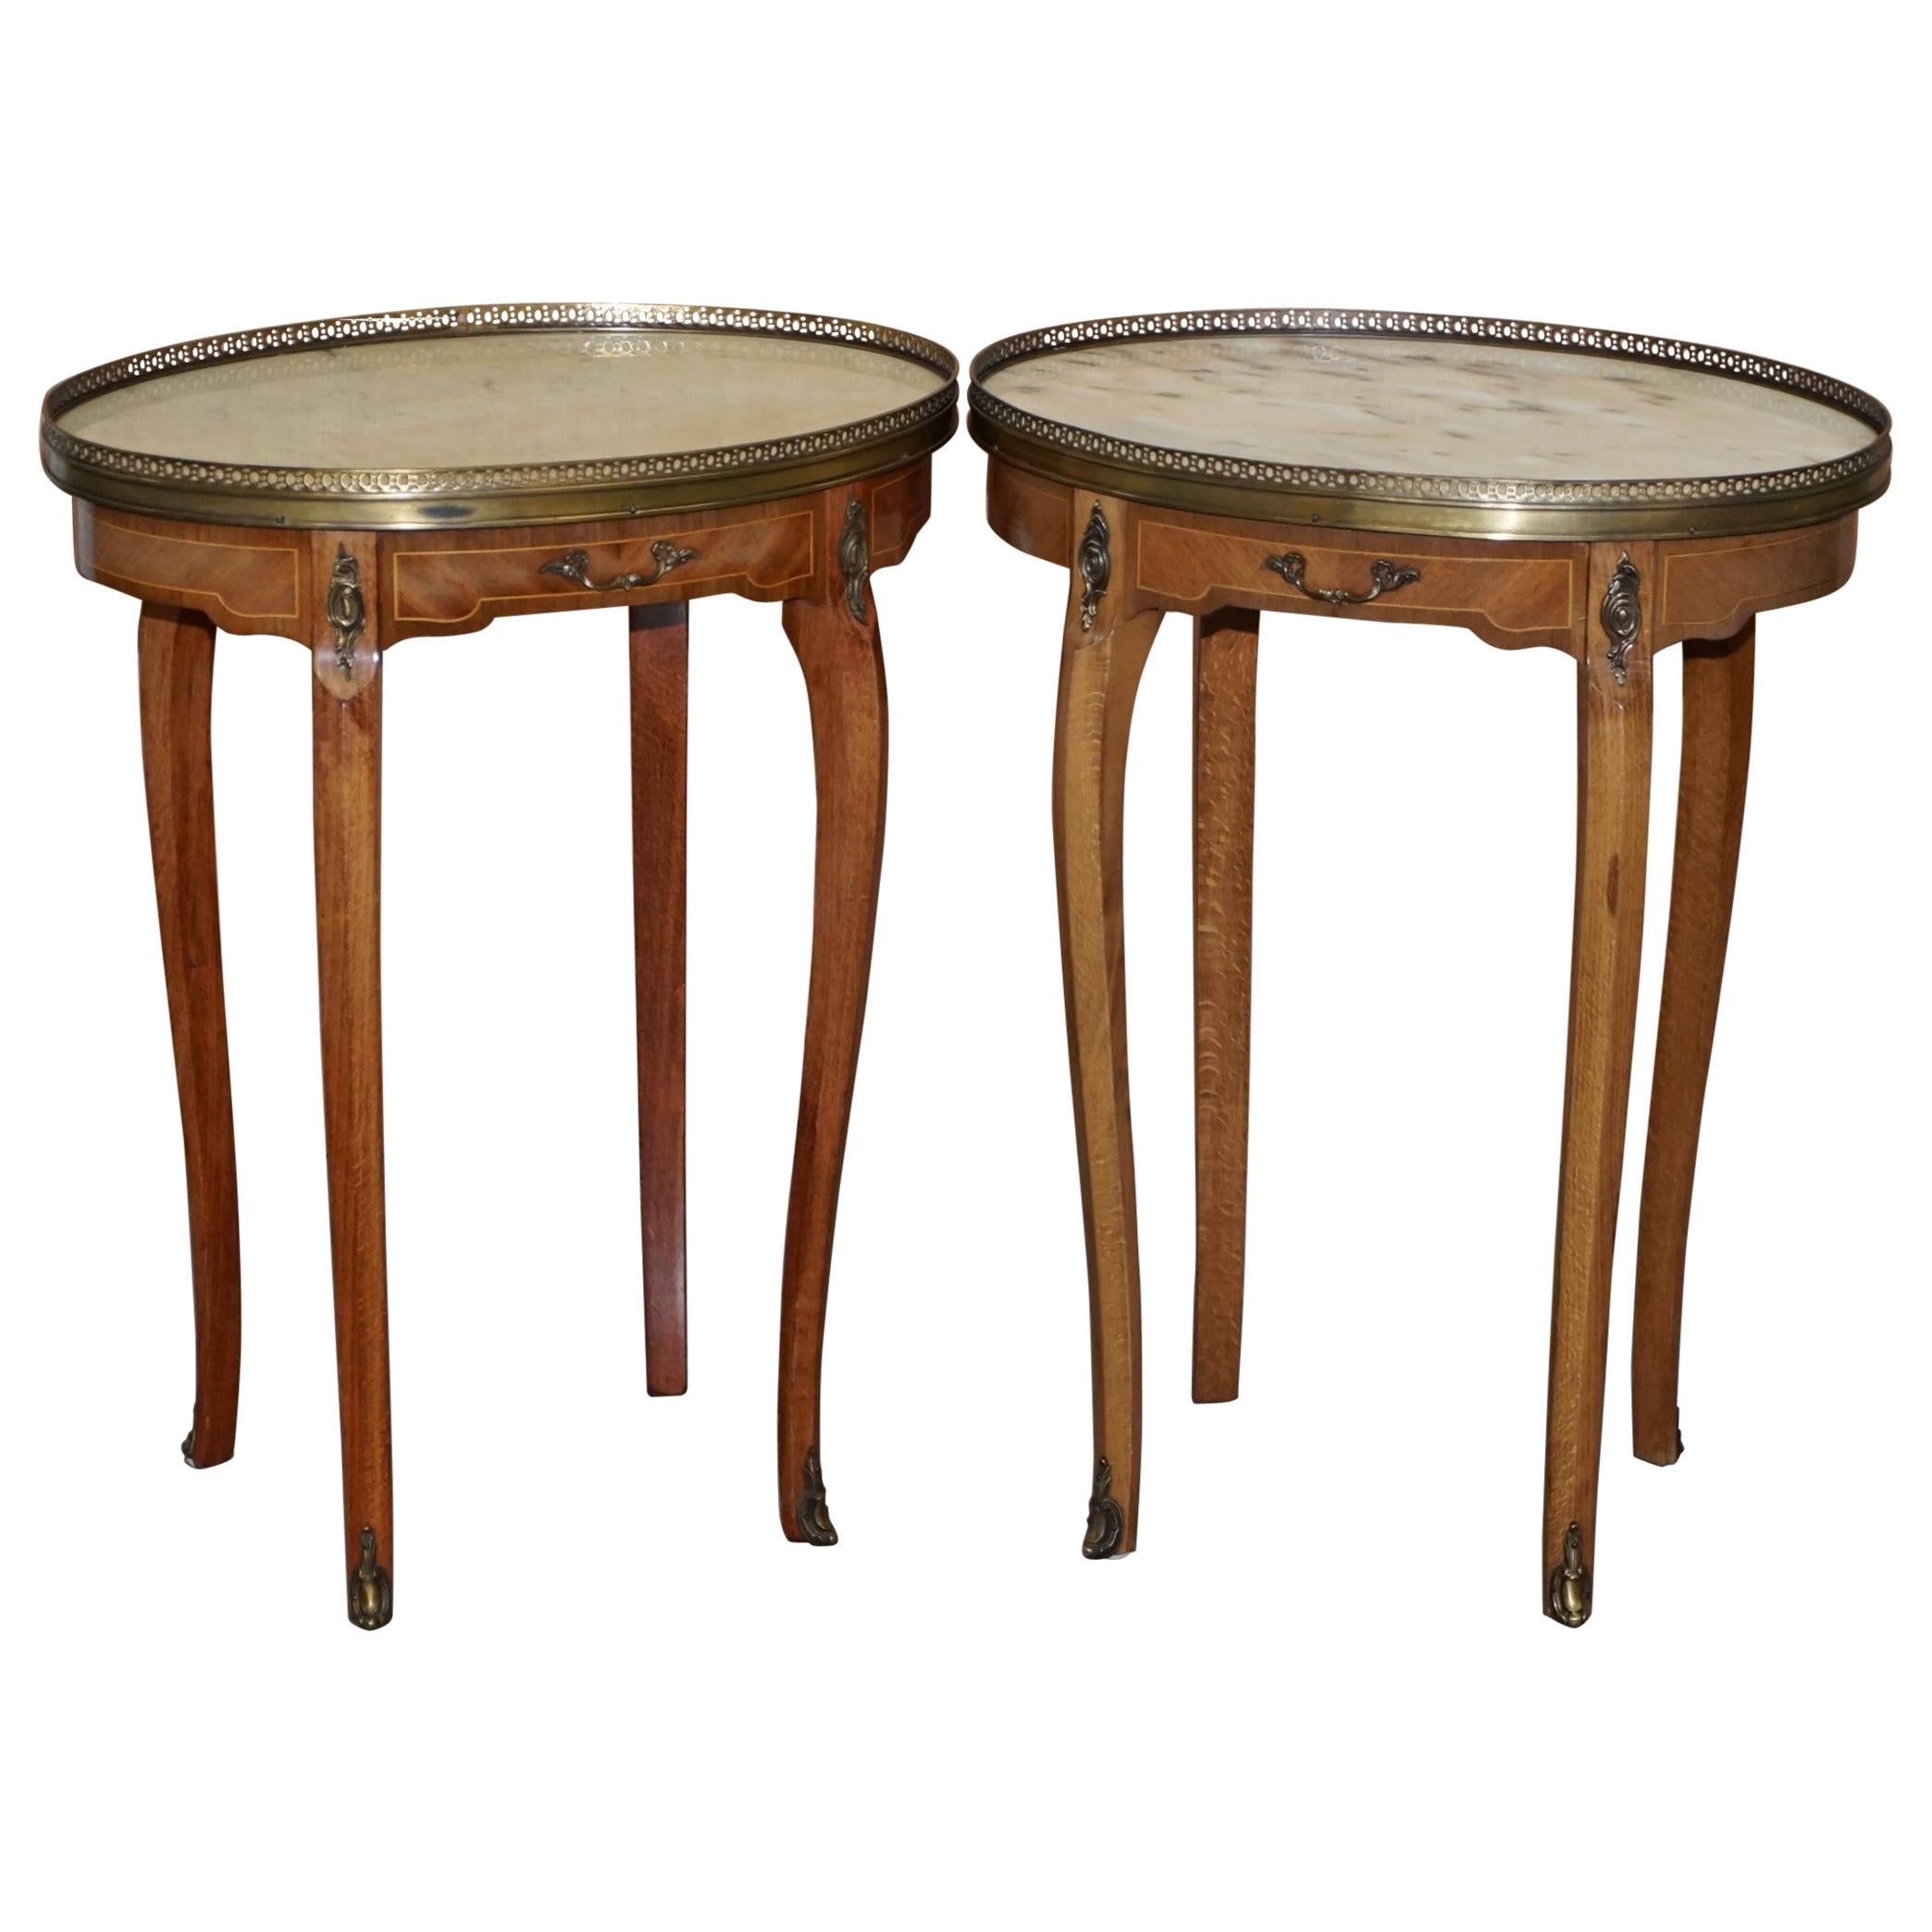 Pair of Oval Oak Single Drawer Marble-Topped Brass Gallery Rail Side End Tables